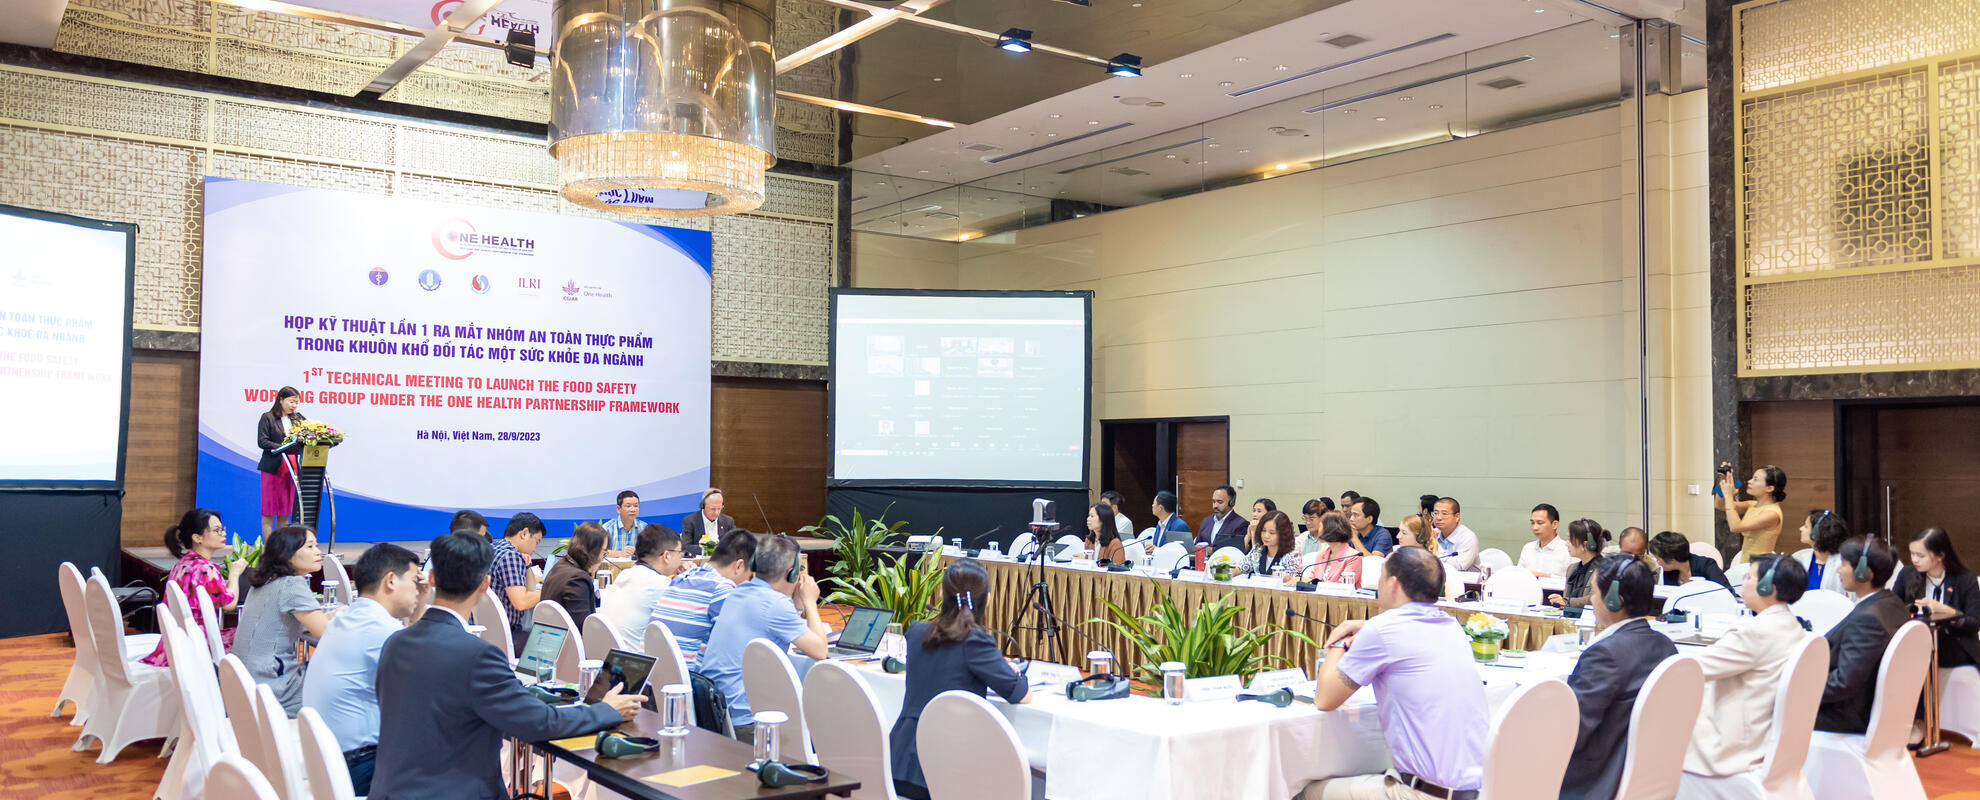 Launch of Food Safety Technical Working Group in Vietnam